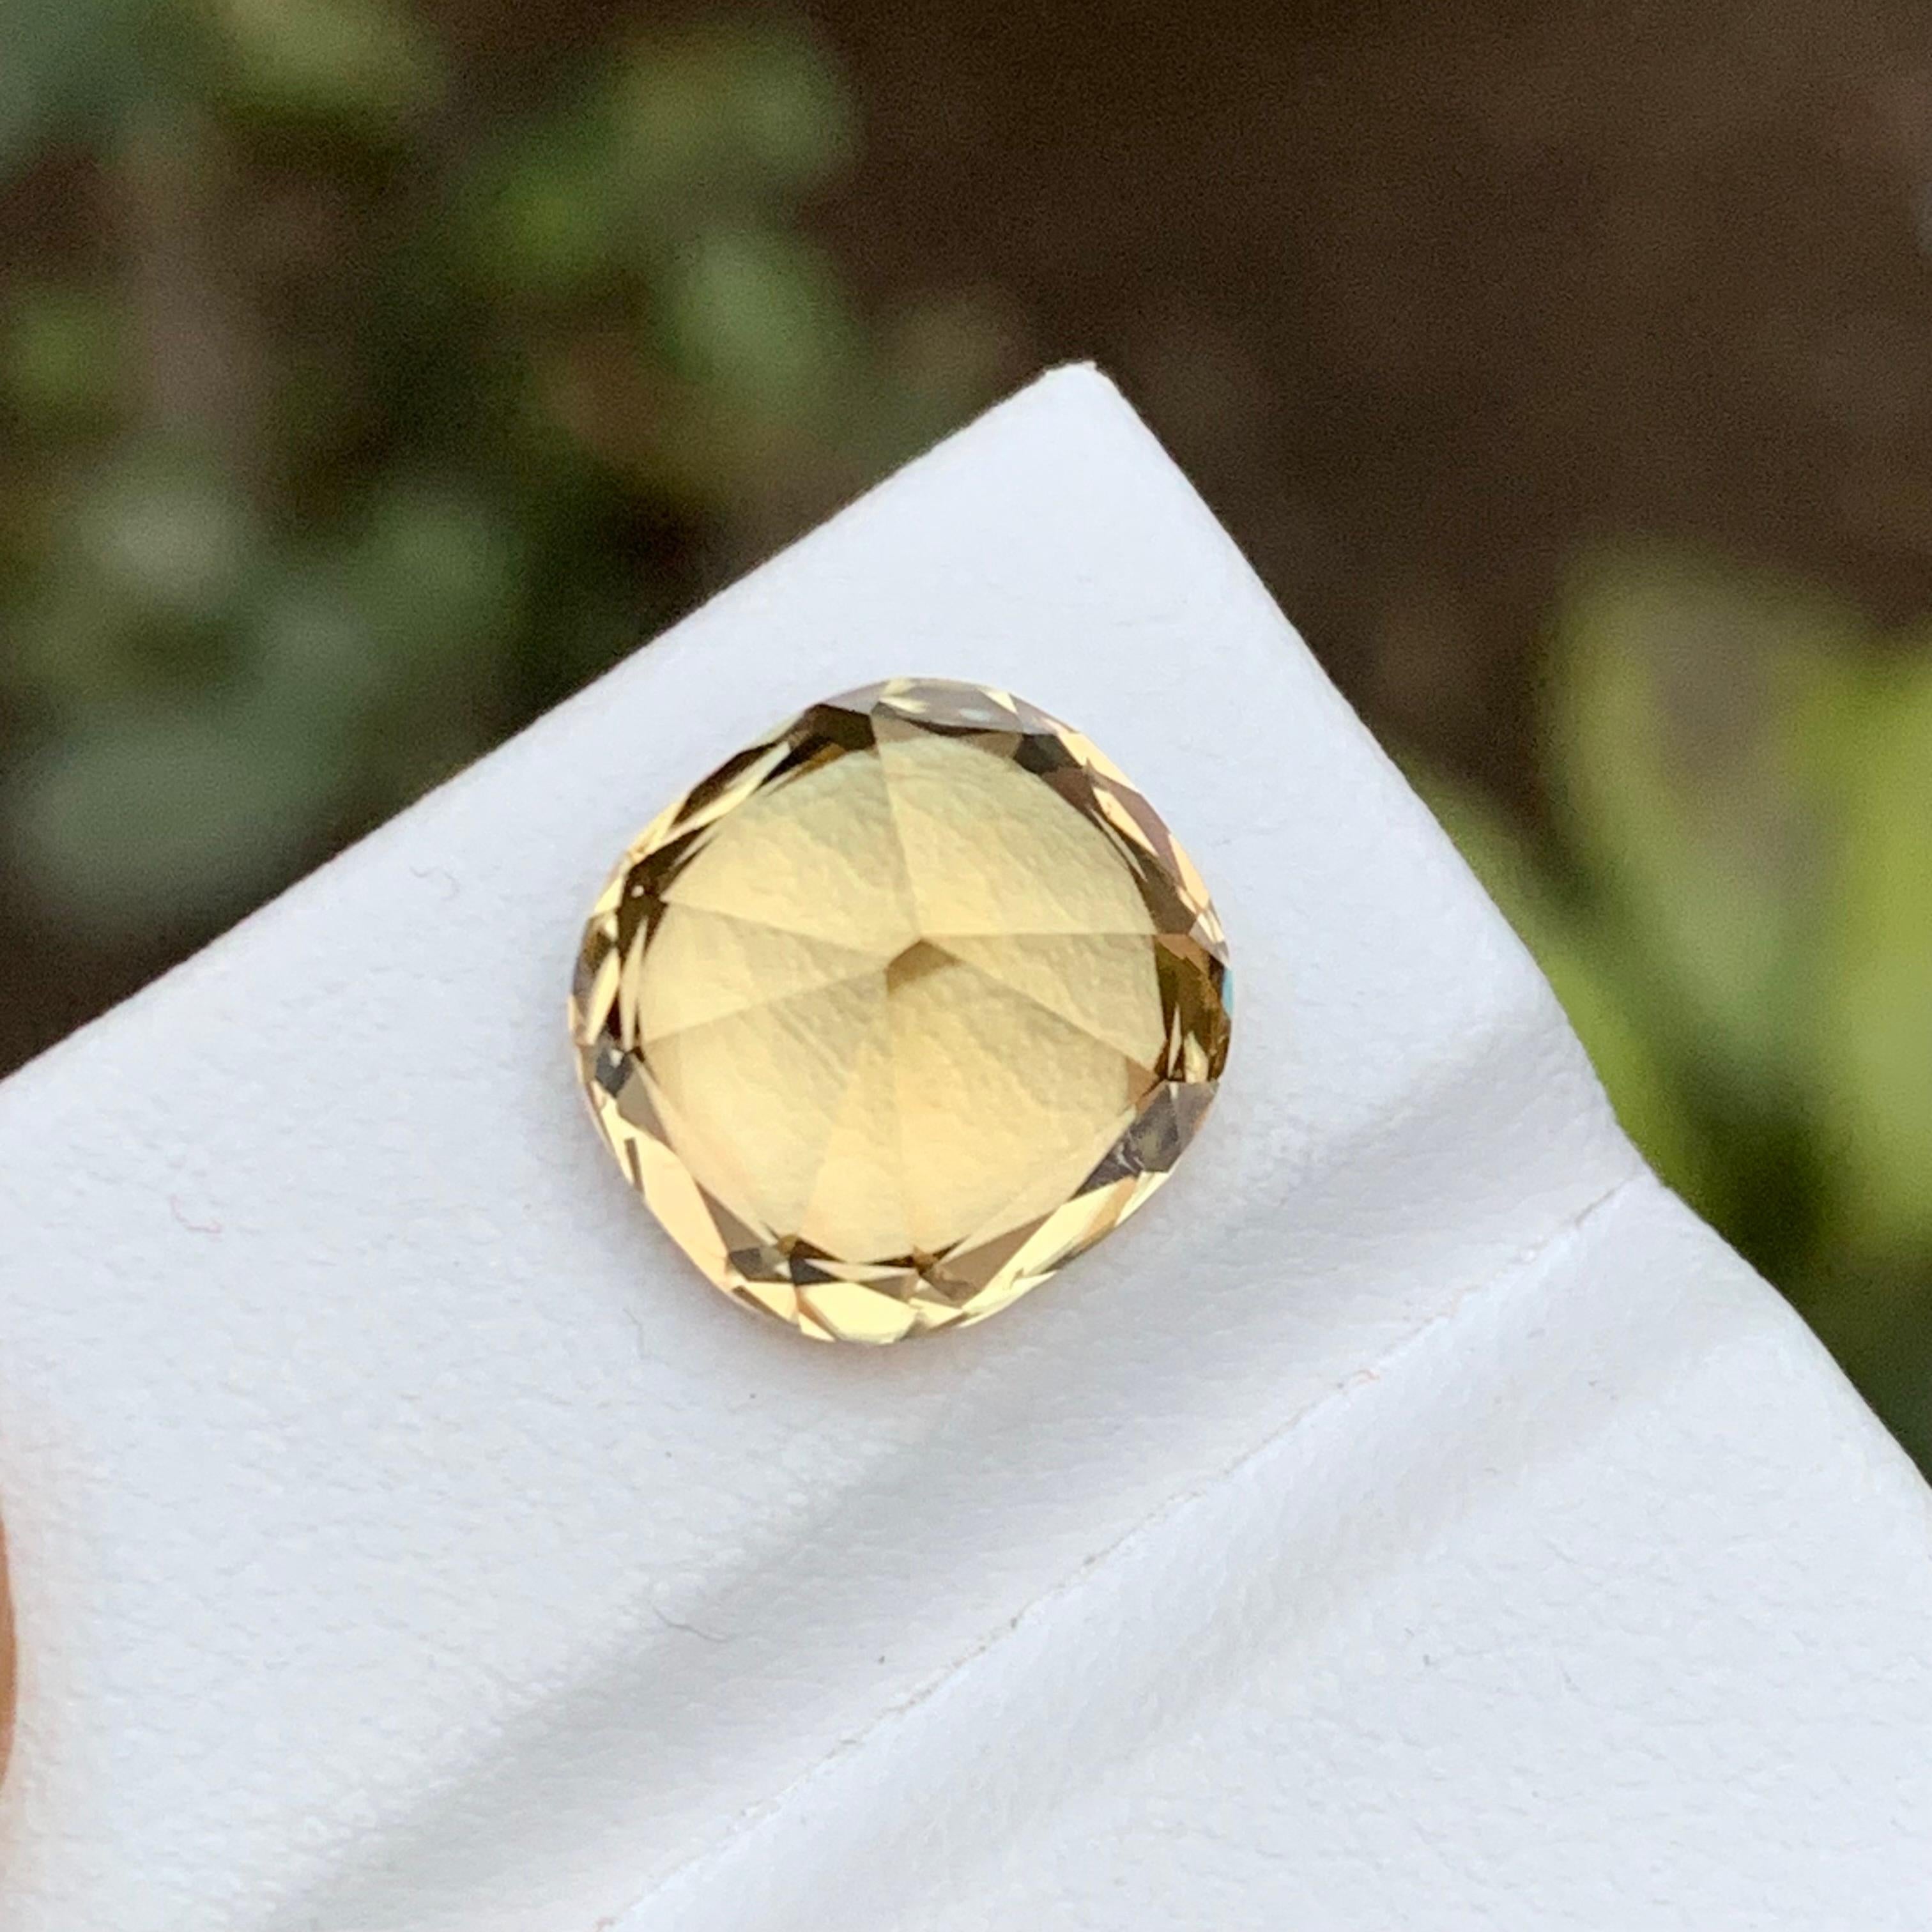 Golden Yellow Natural Tourmaline Gemstone, 6.75 Ct Cushion Cut for Ring/Pendant For Sale 8